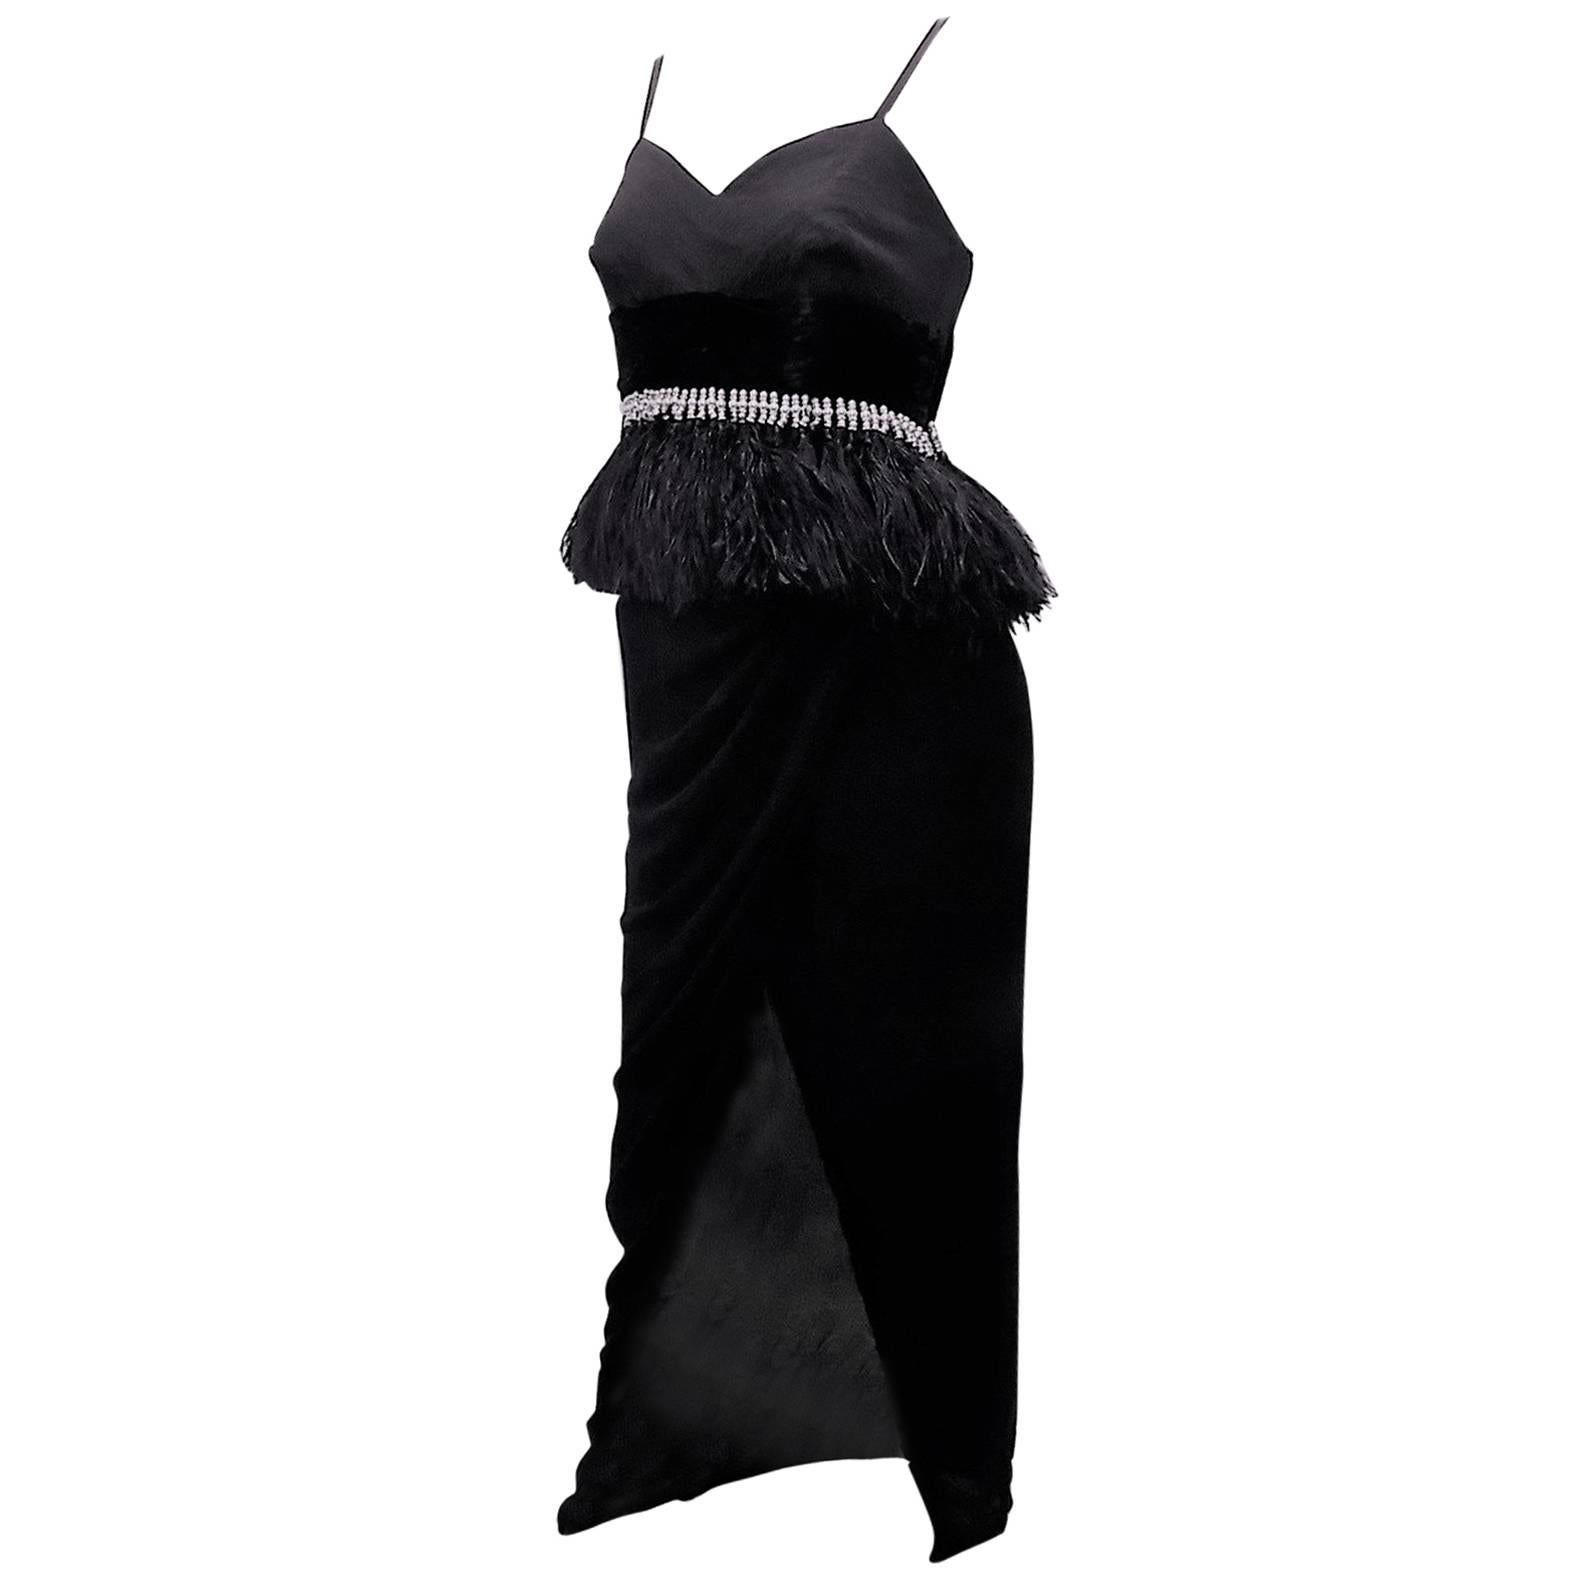 One of a kind and in pristine condition. Black mini dress with silk chiffon tulip skirt over. Micro stitched corset top featuring velvet sash adorned with crystals and Perls ending with ostrich  fringe. Size 4 With Bust 34"
Pristine condition